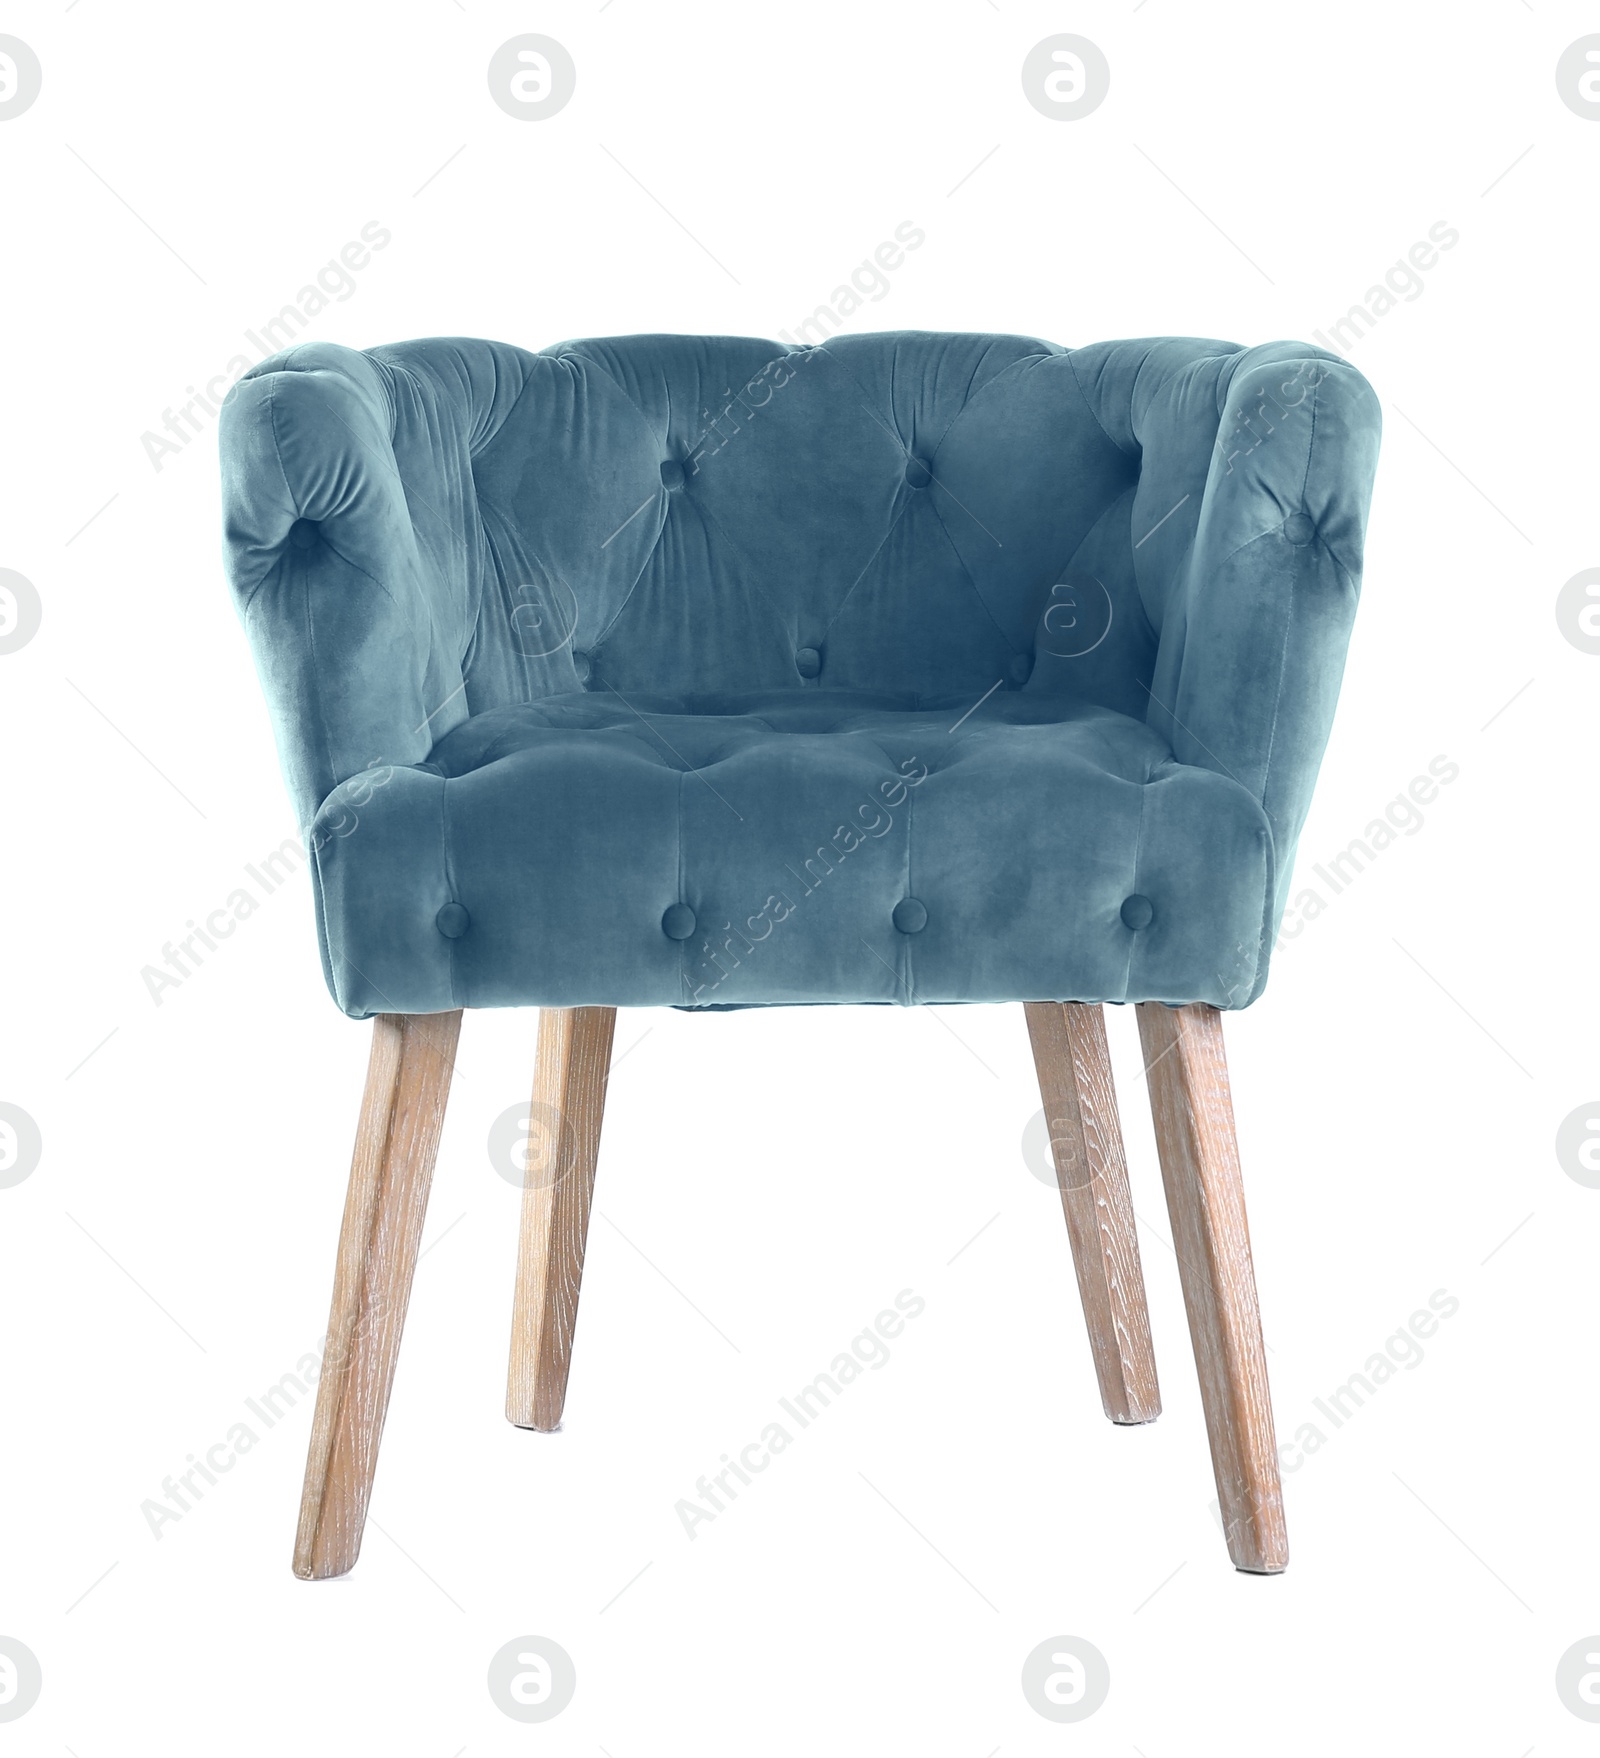 Image of One comfortable light blue armchair isolated on white